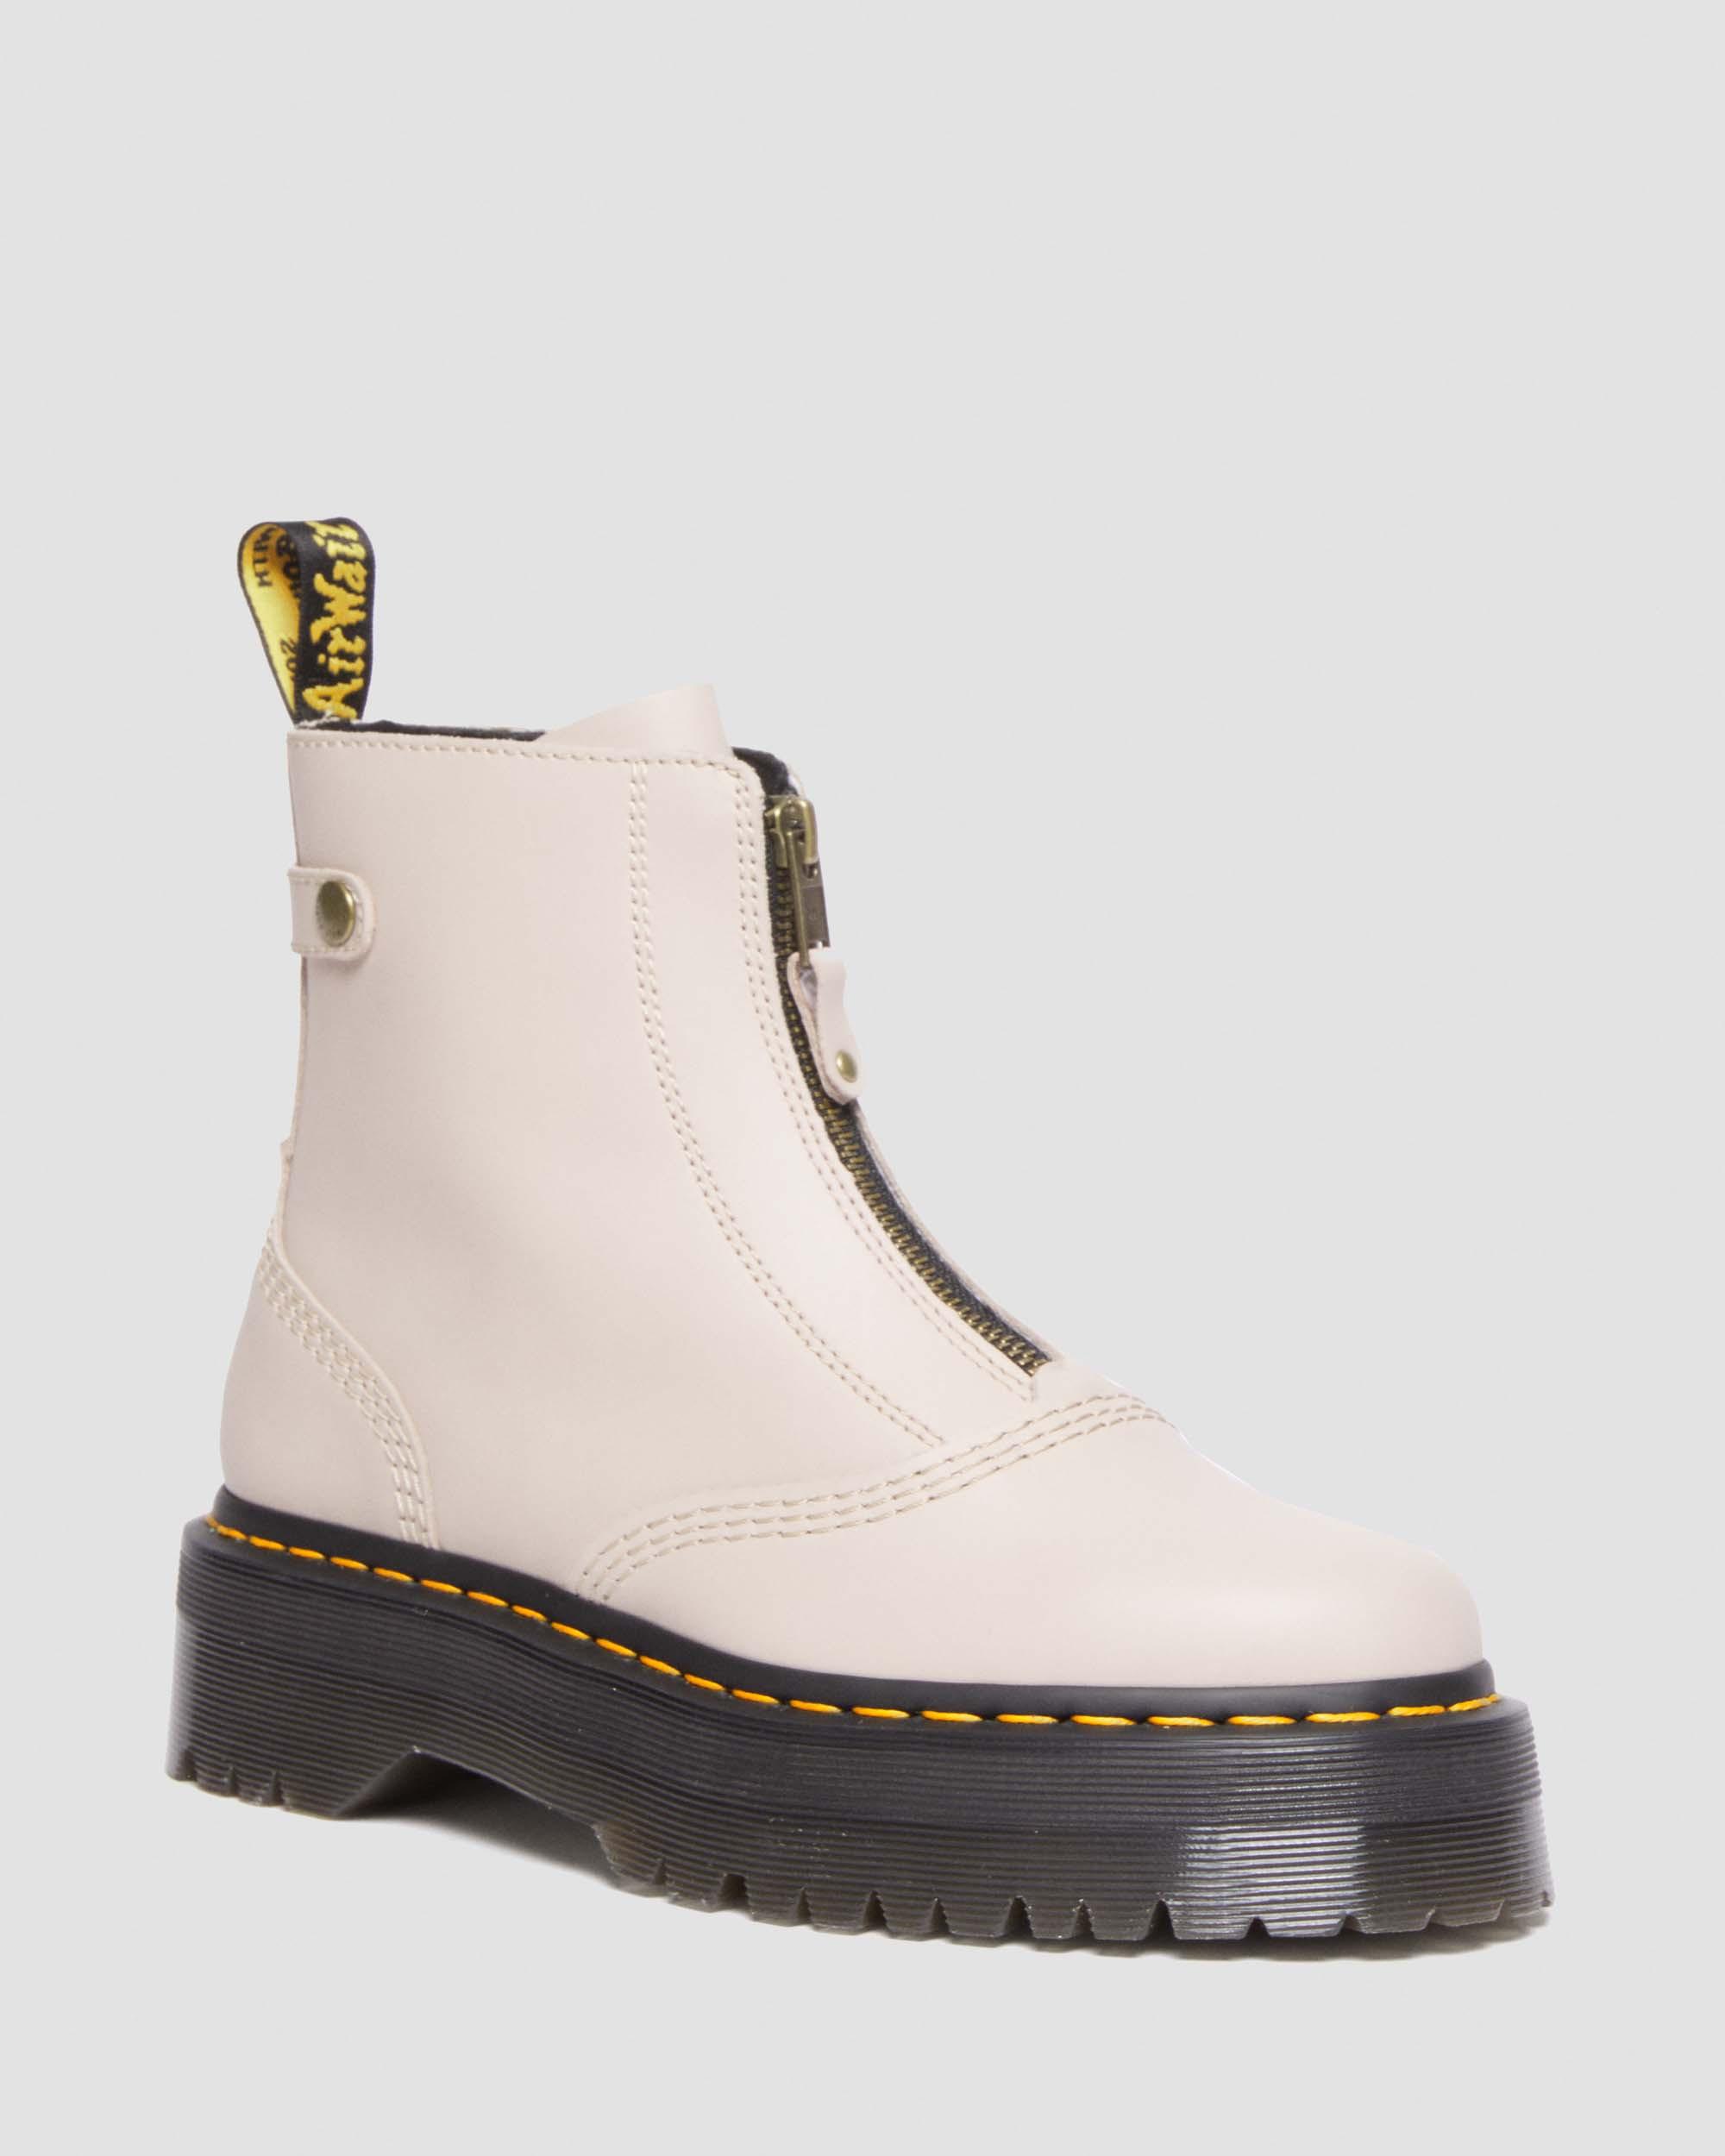 Jetta Zipped Sendal Leather Platform Boots in Vintage Taupe | Dr. Martens